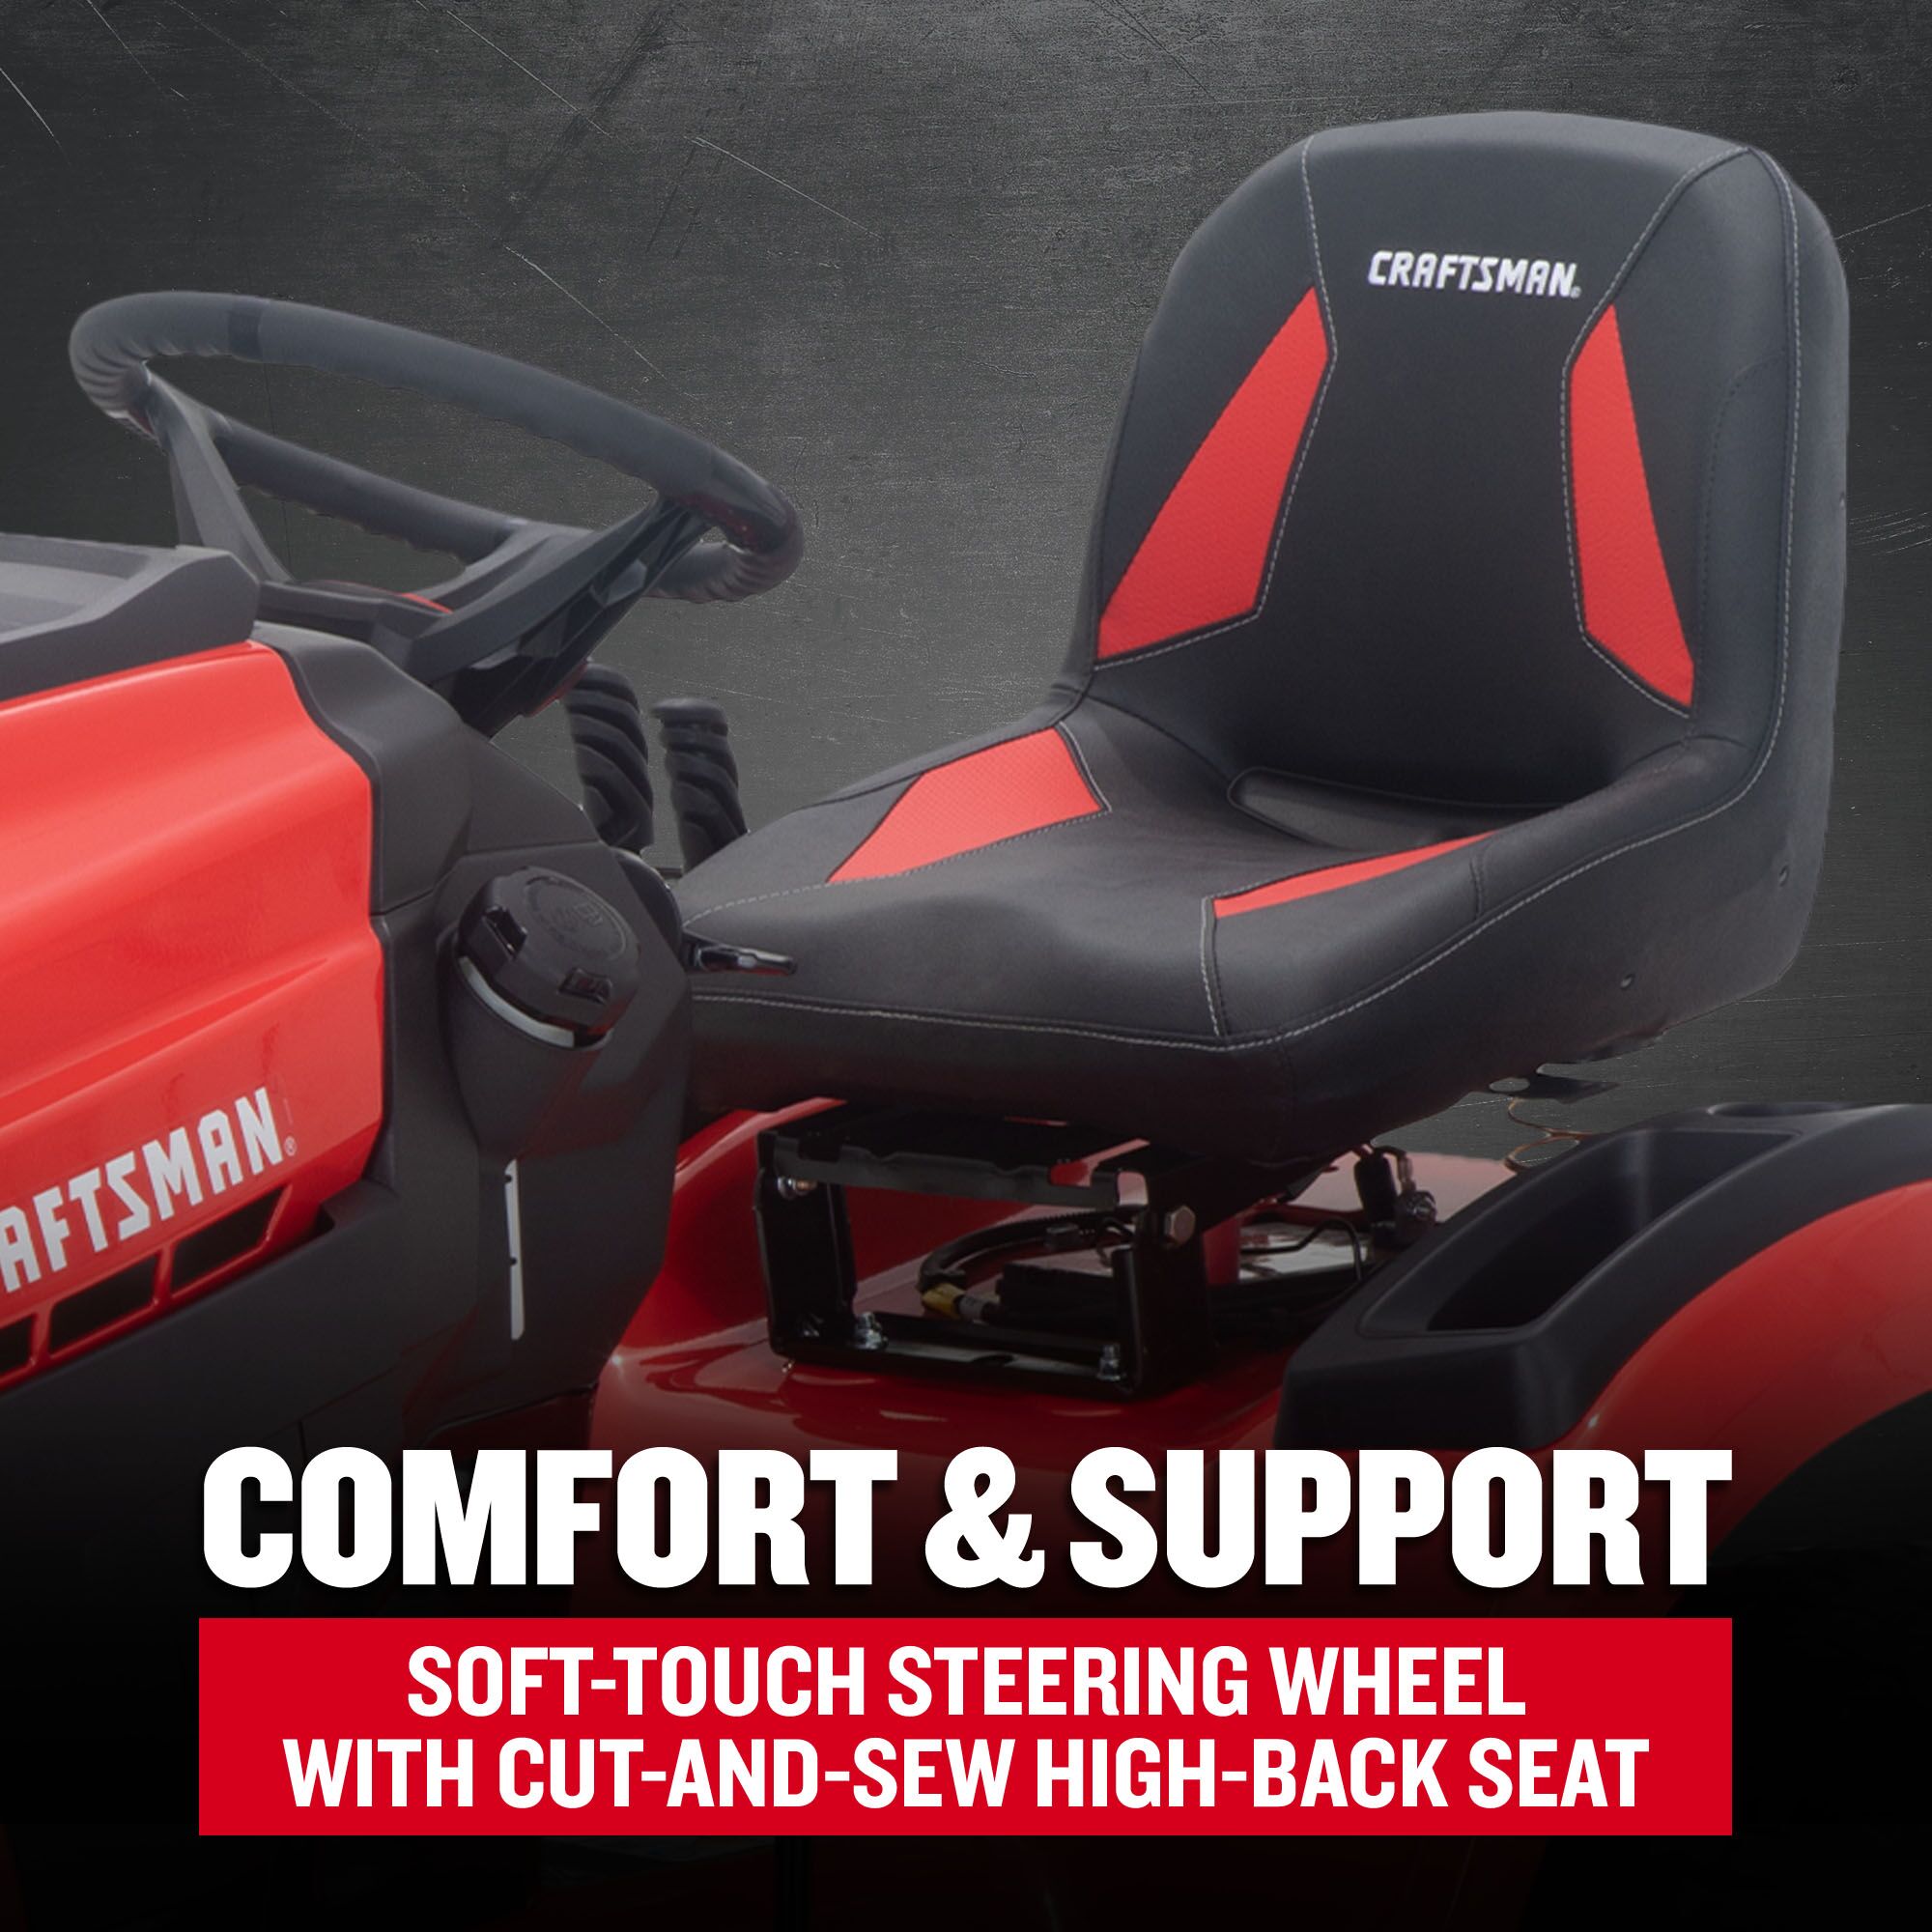 CRAFTSMAN T2200K Seat and Wheel eCOMM Graphic